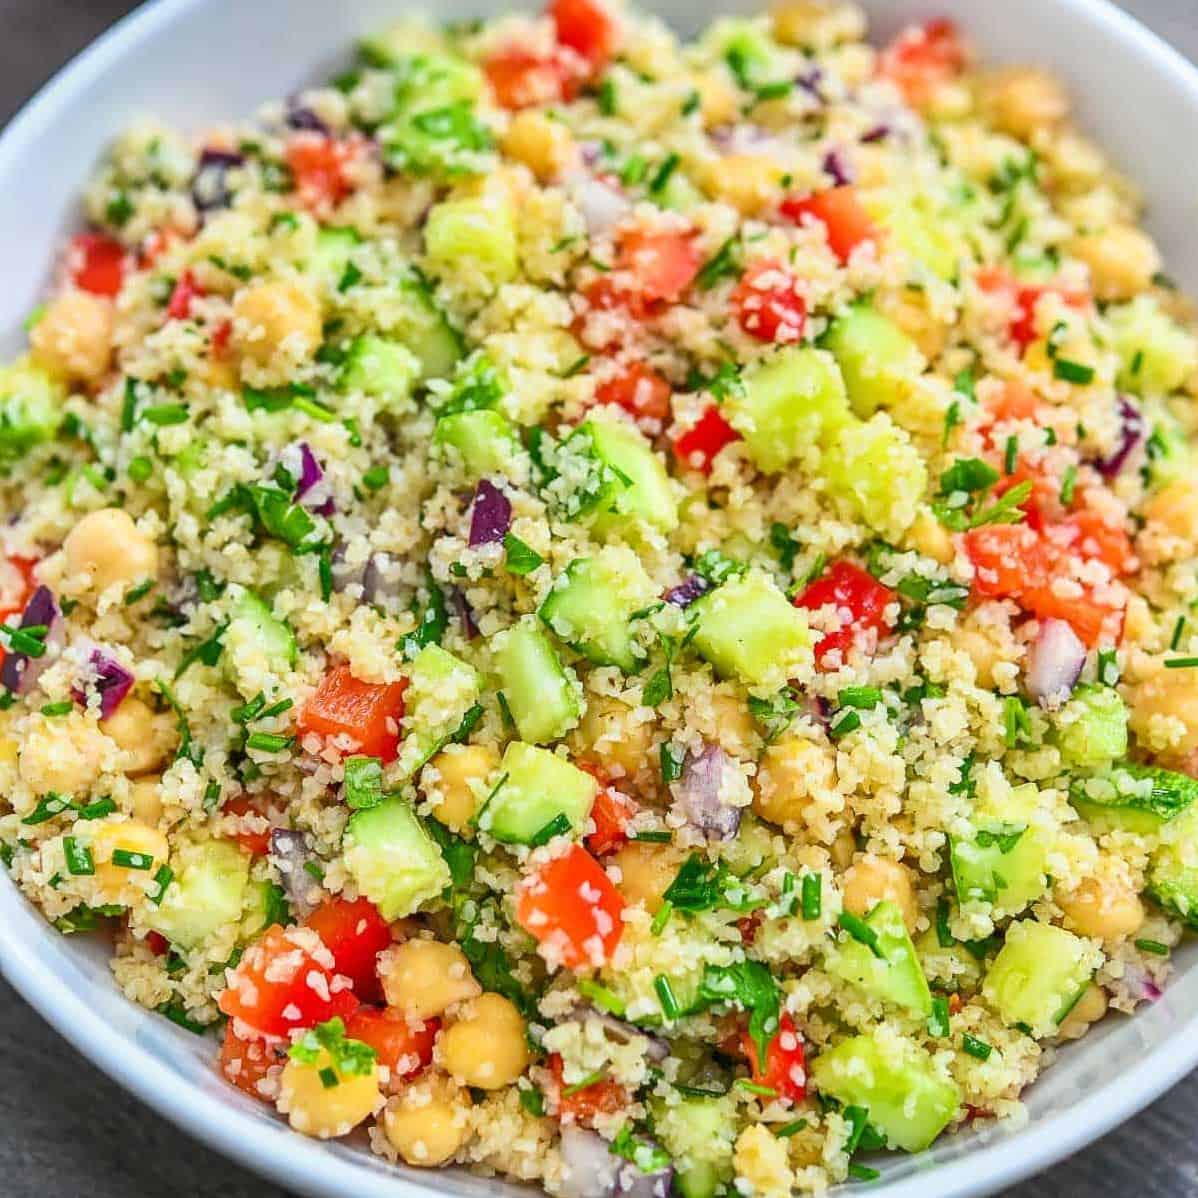  Take a break from traditional salads and enjoy this bulgur salad instead.